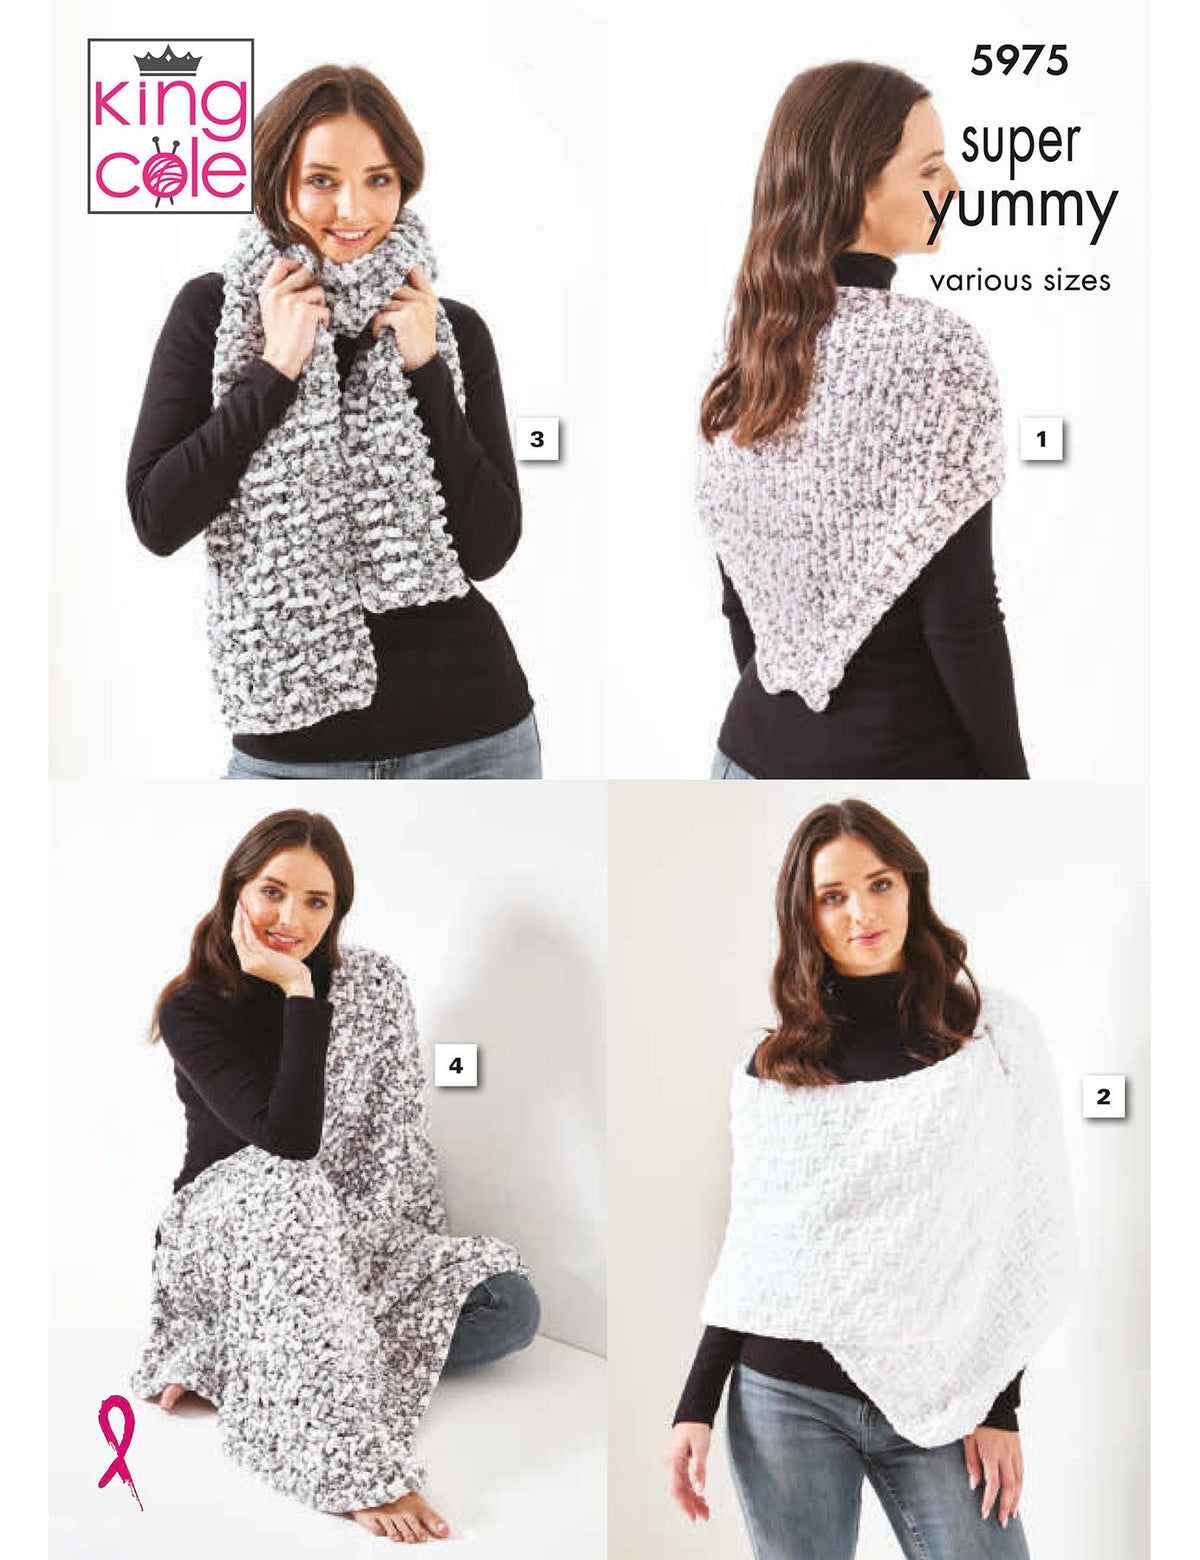 King Cole Super Yummy knitting pattern (5975) scarves